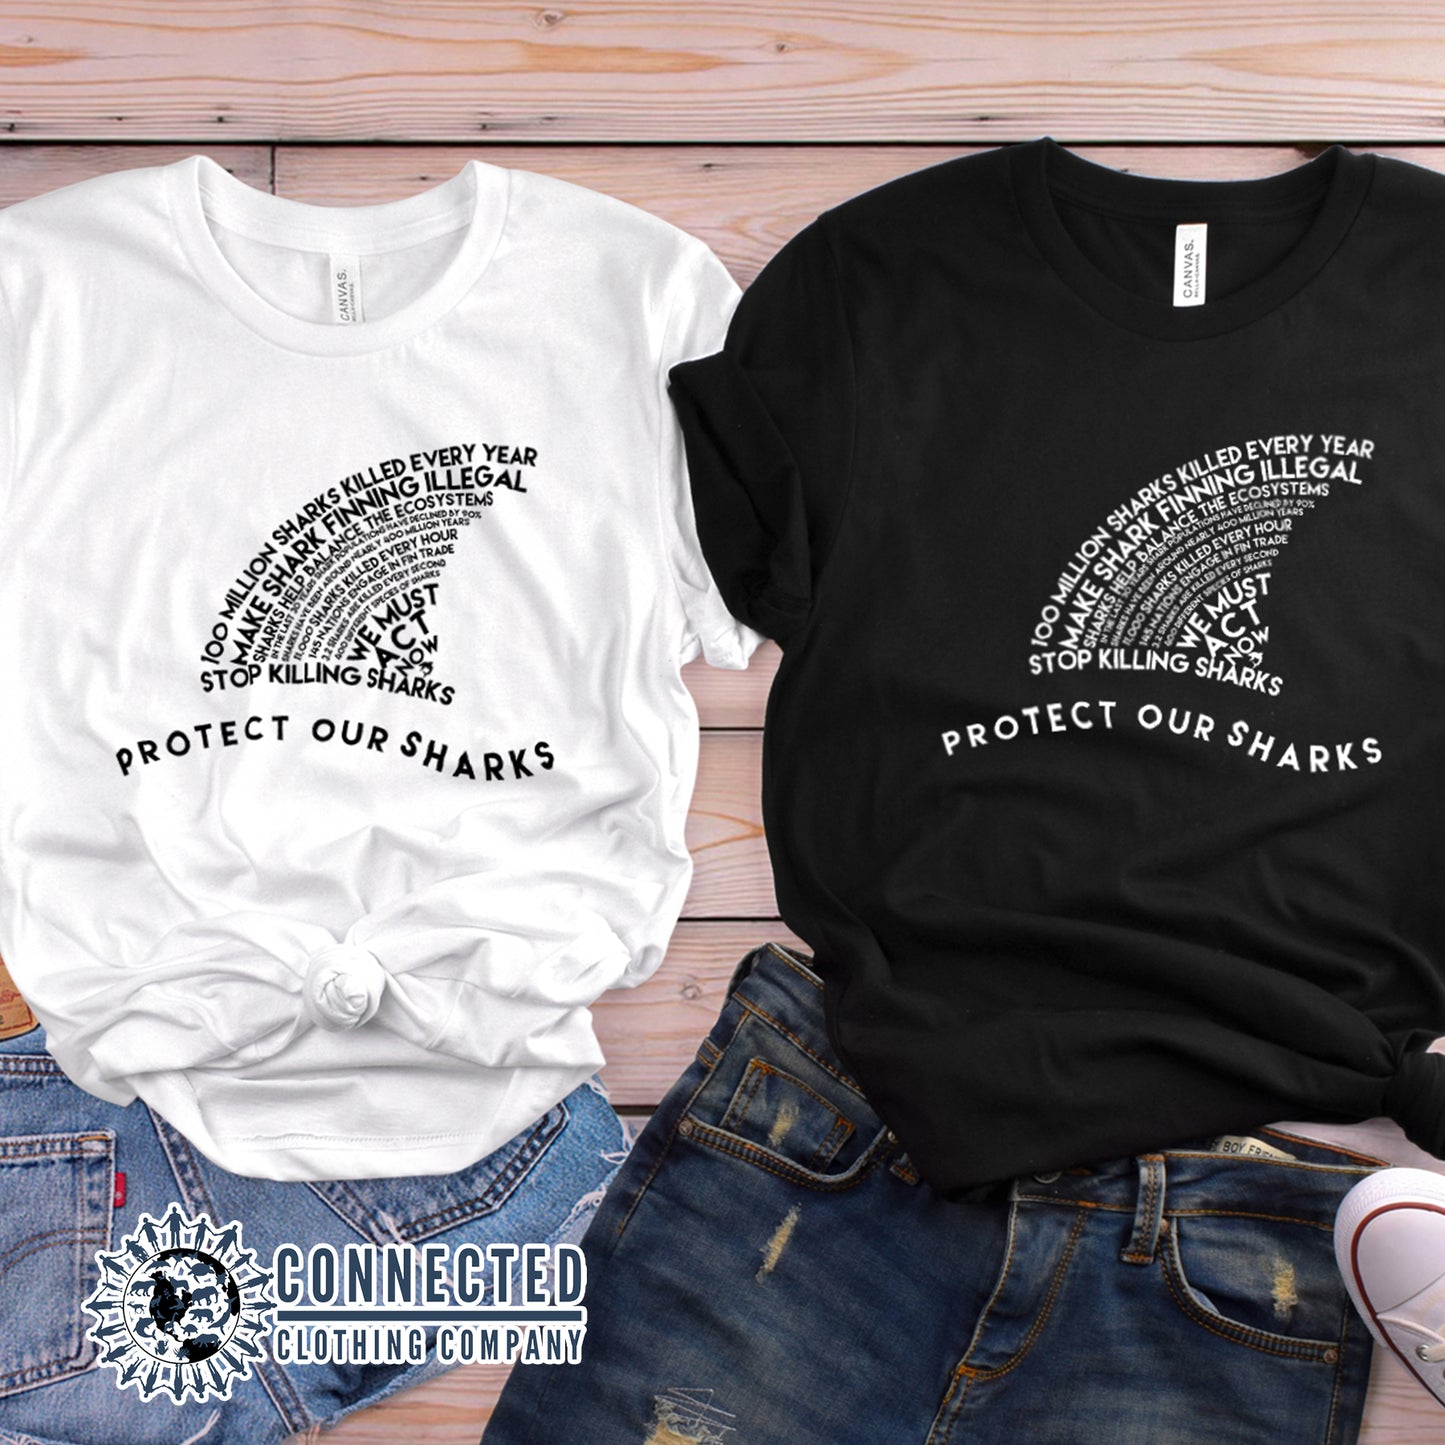 Black and White Protect Our Sharks Short-Sleeve Tees - sweetsherriloudesigns - Ethically and Sustainably Made - 10% of profits donated to shark conservation and ocean conservation